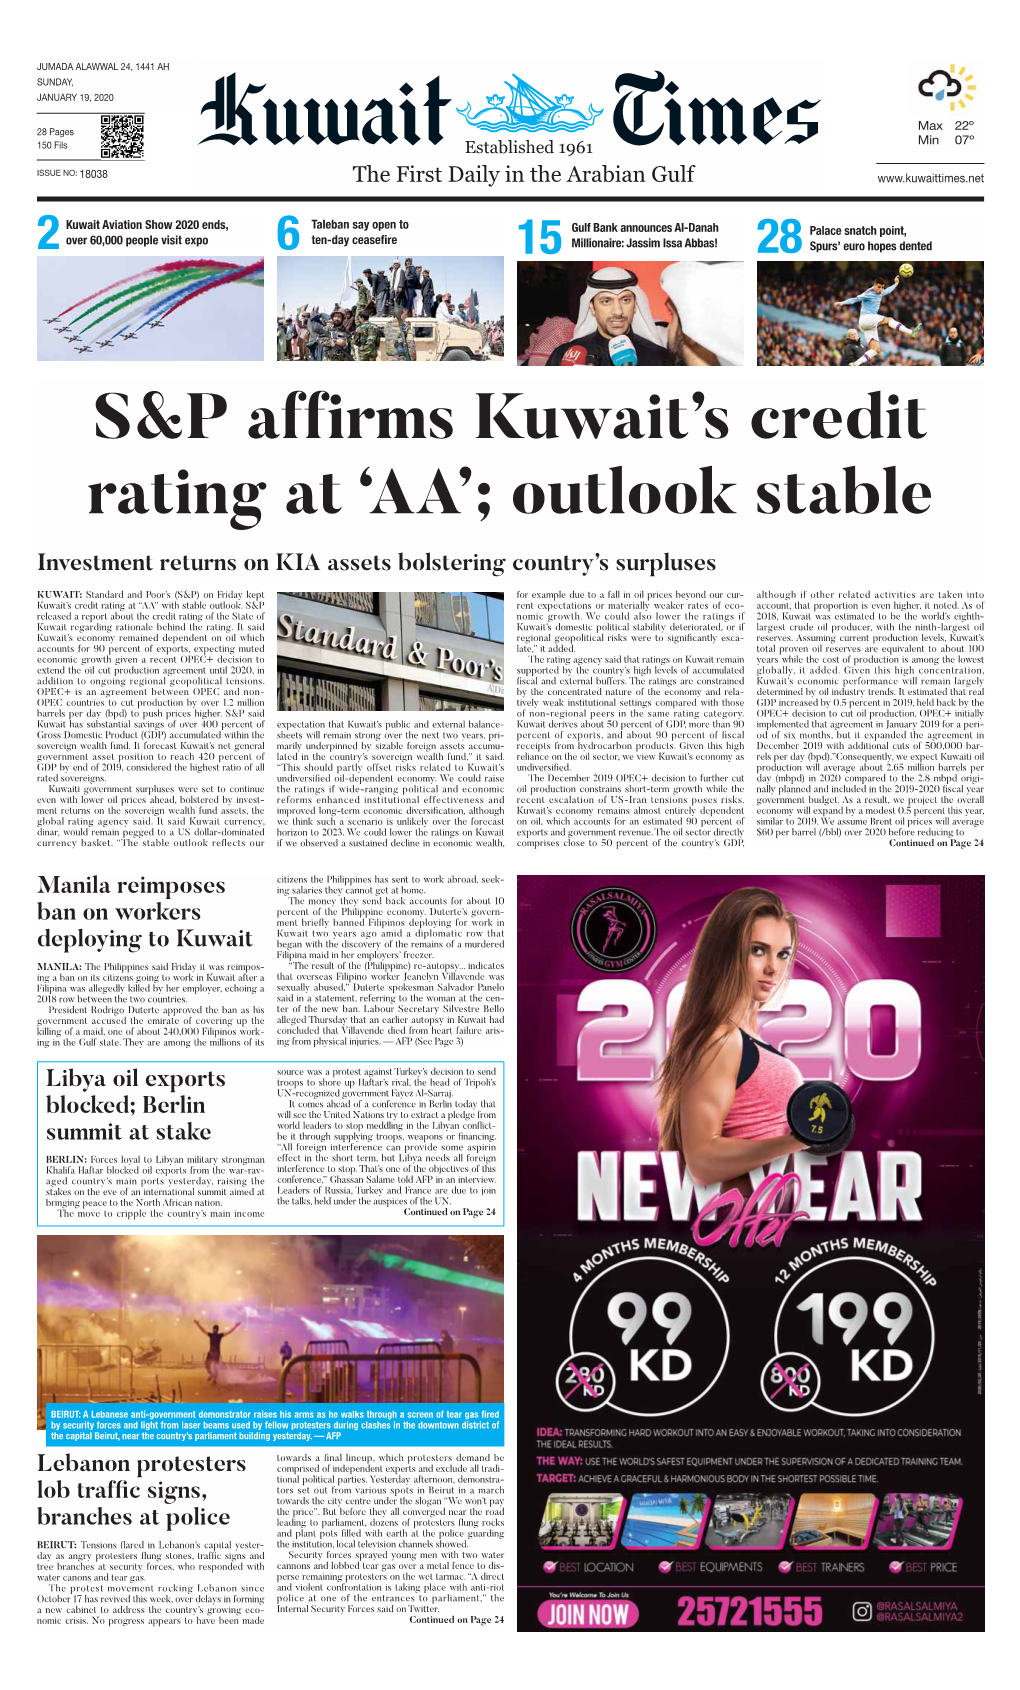 S&P Affirms Kuwait's Credit Rating At